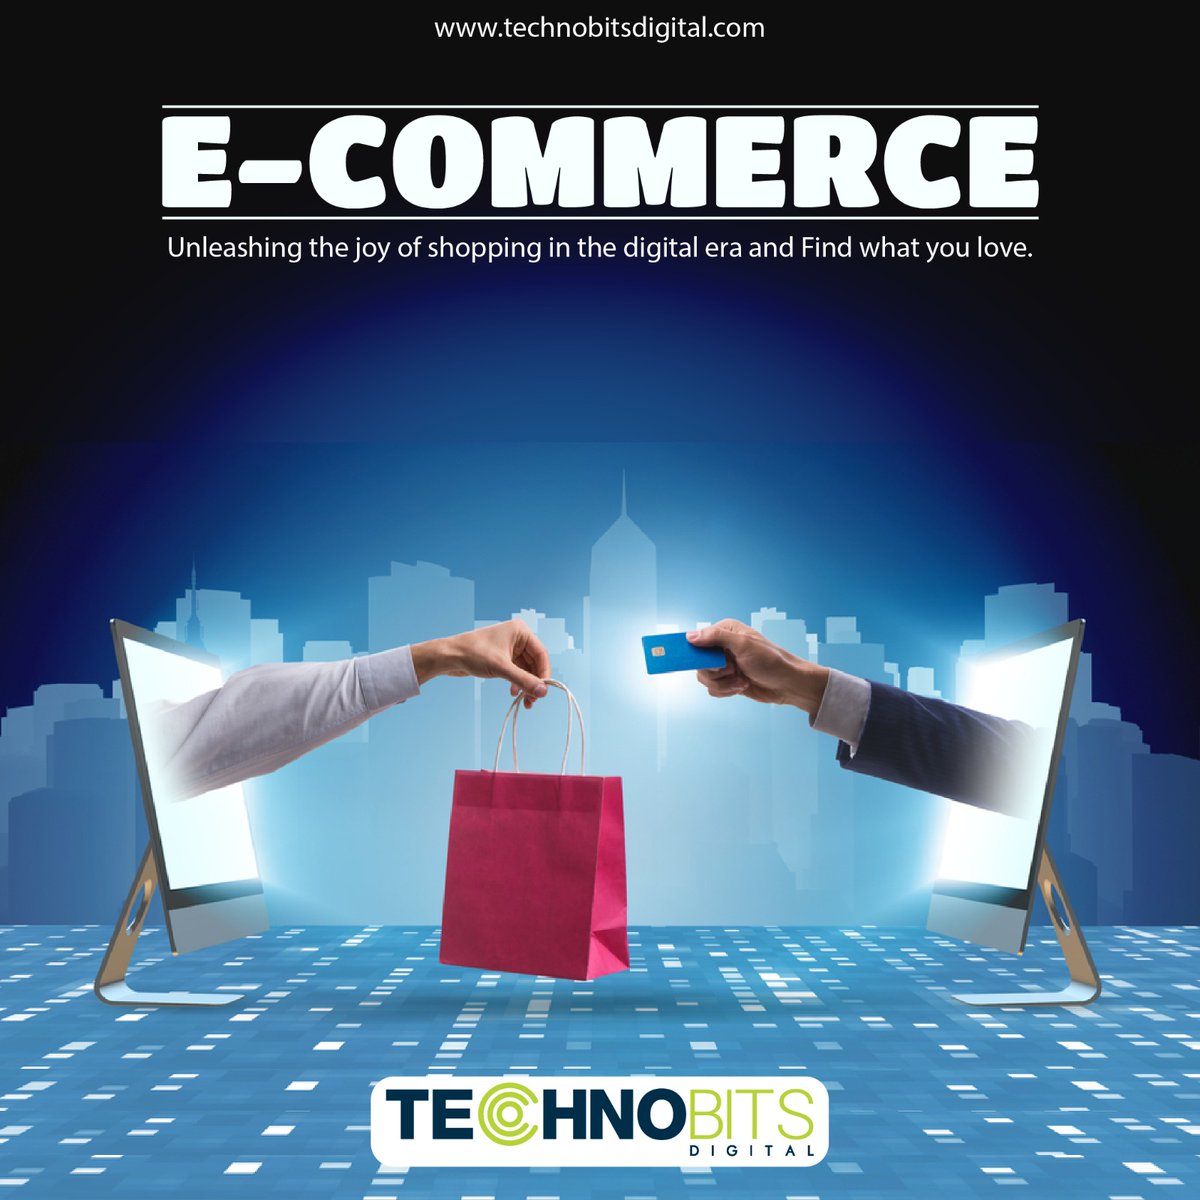 E-commerce, also known as electronic commerce, refers to the buying and selling of goods and services over the Internet.
.
.
#TechnobitsDigital #ecommercedesign #ecommercedevelopment 🌈🎯